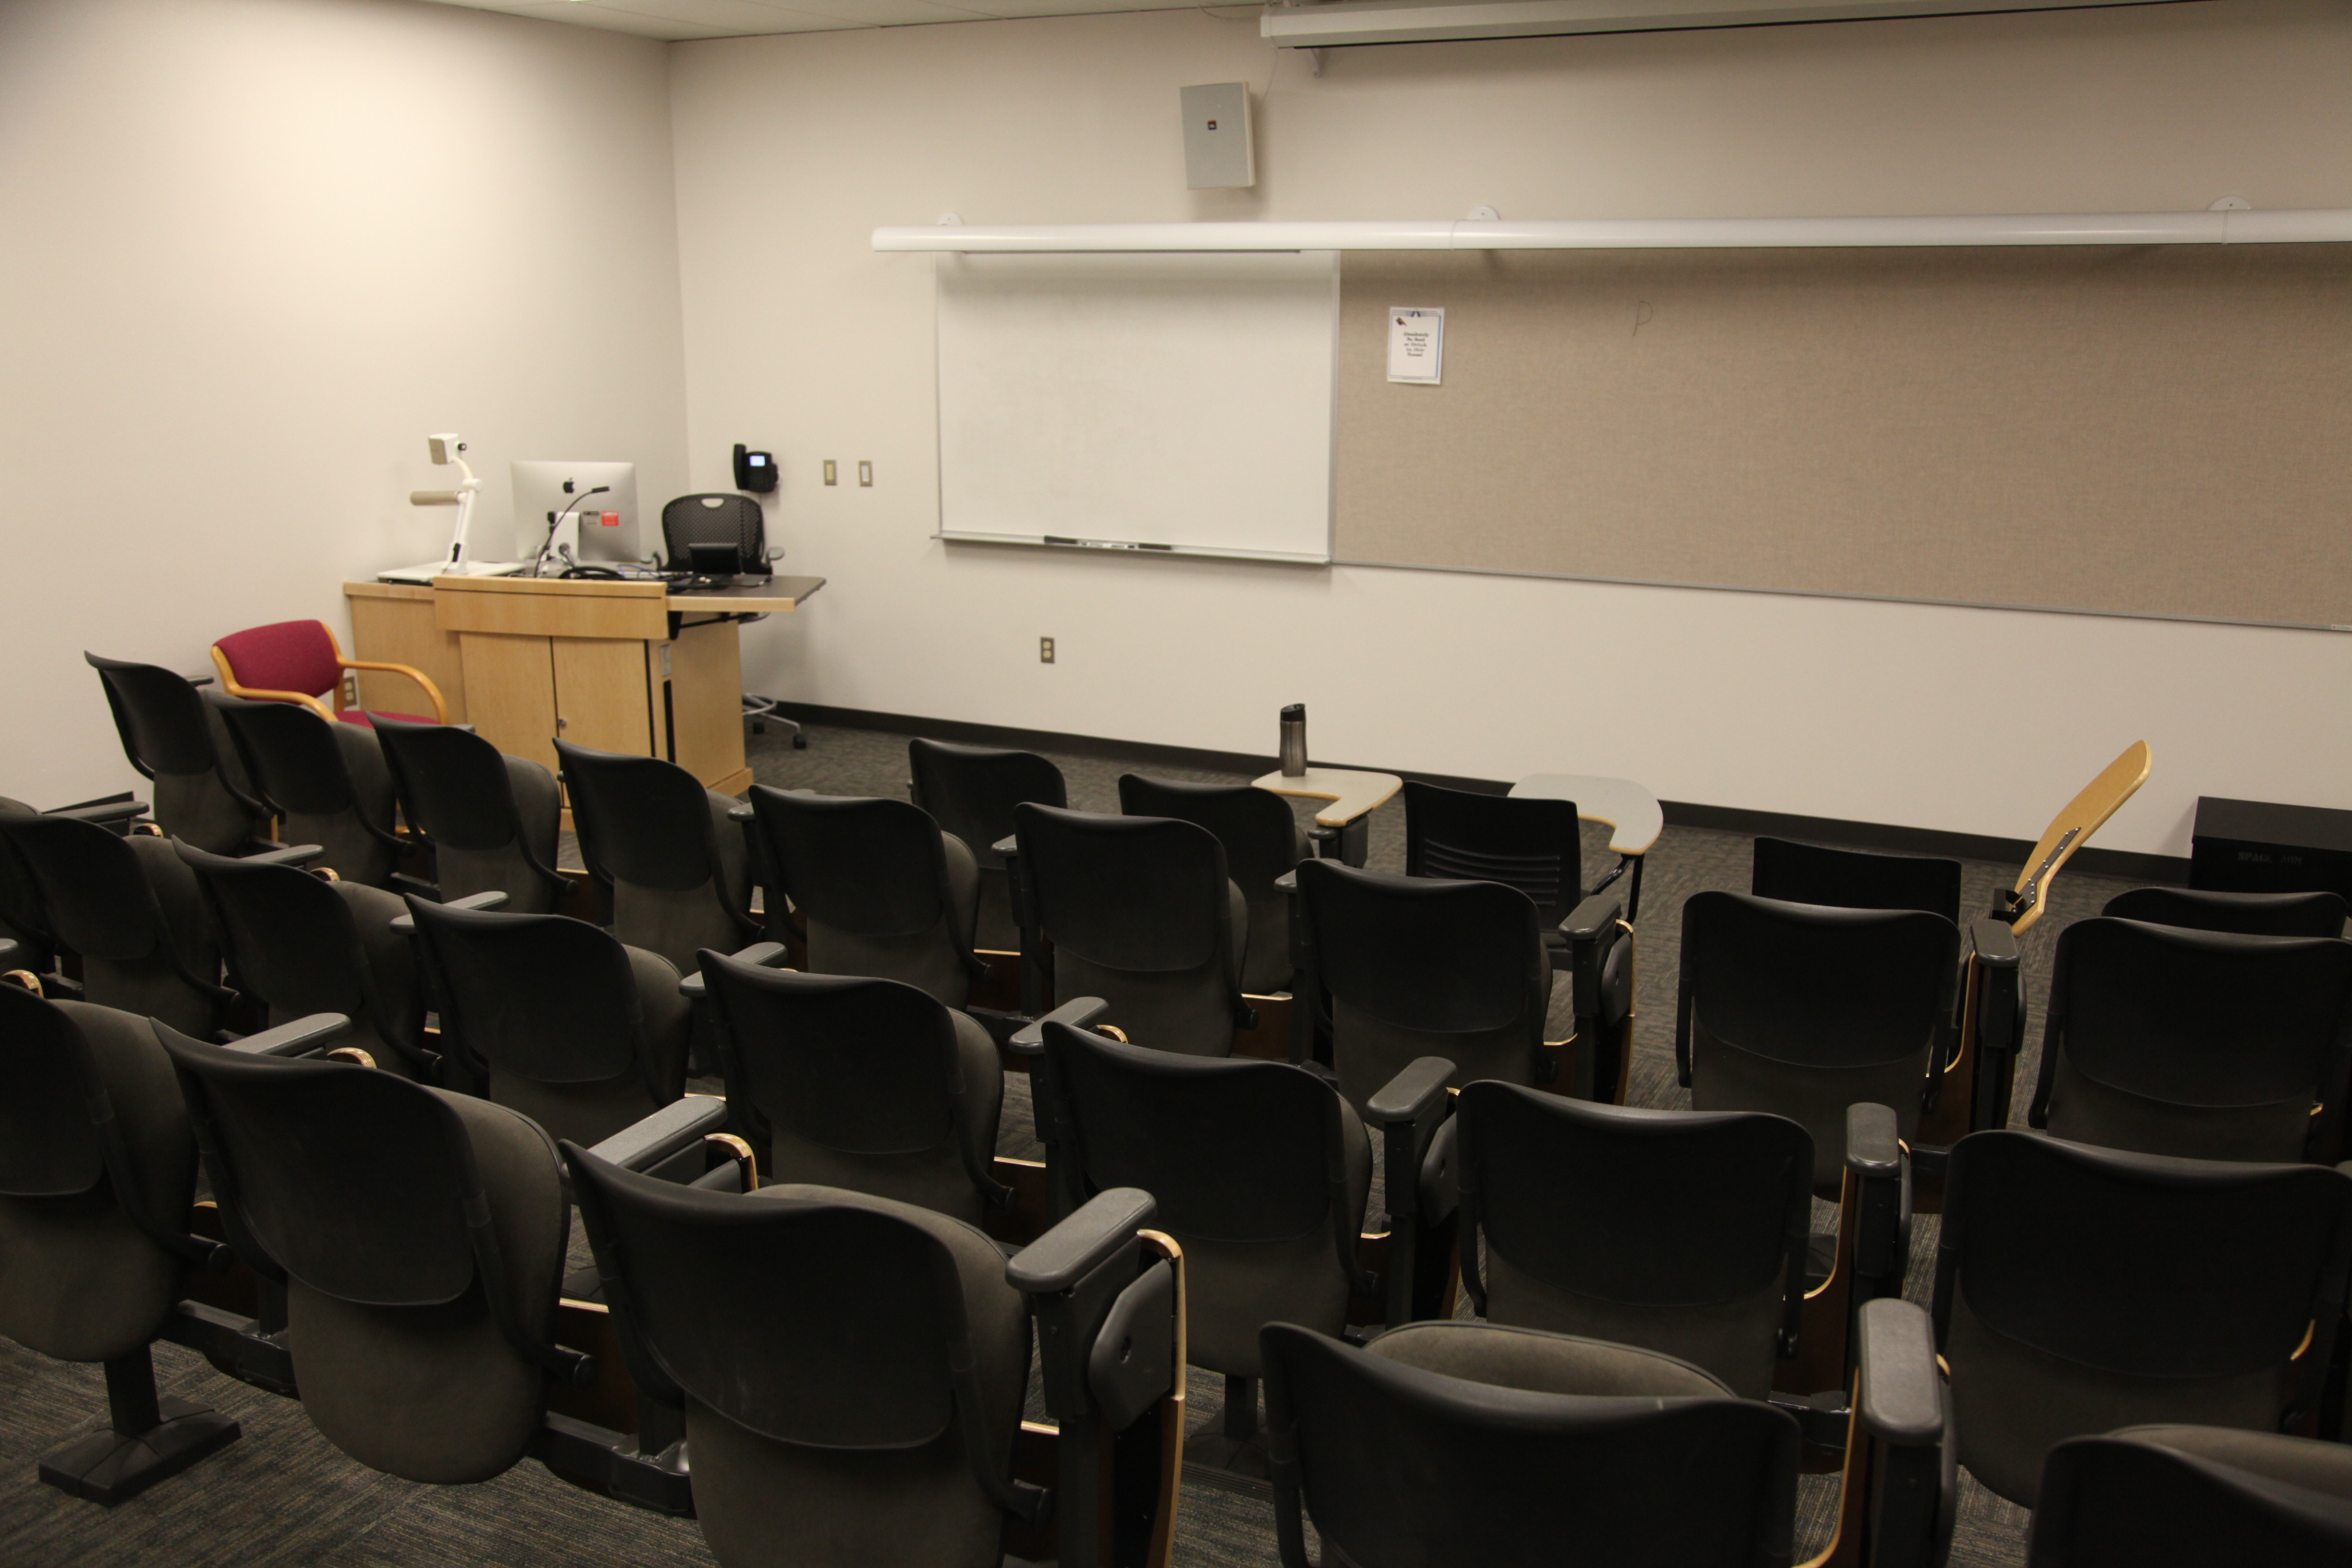 Room Consists of stationary tablet armchairs, White board and podium are located at the front of the room.